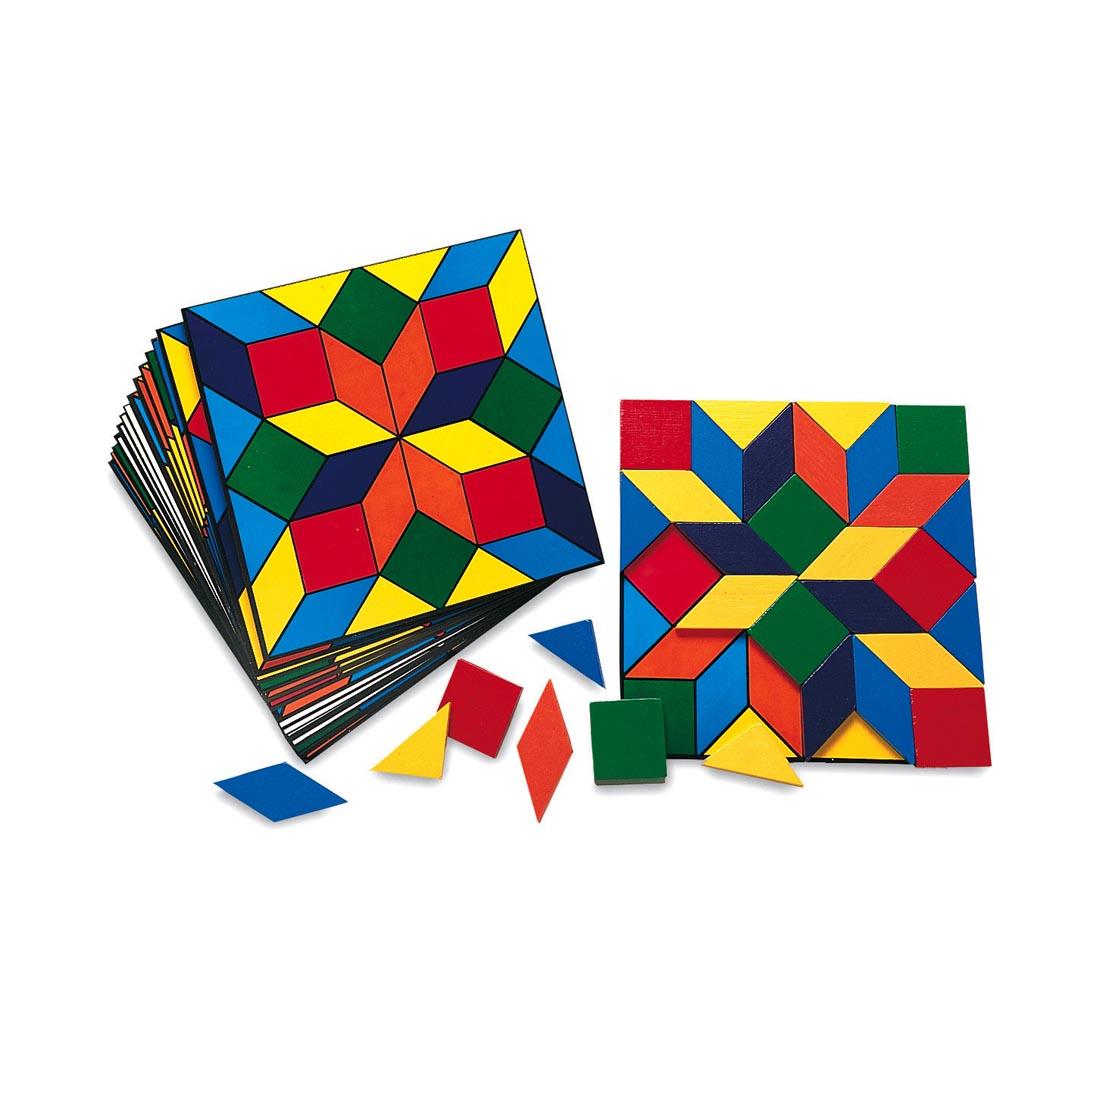 20 parquetry pattern cards with colorful, wooden Parquetry Blocks